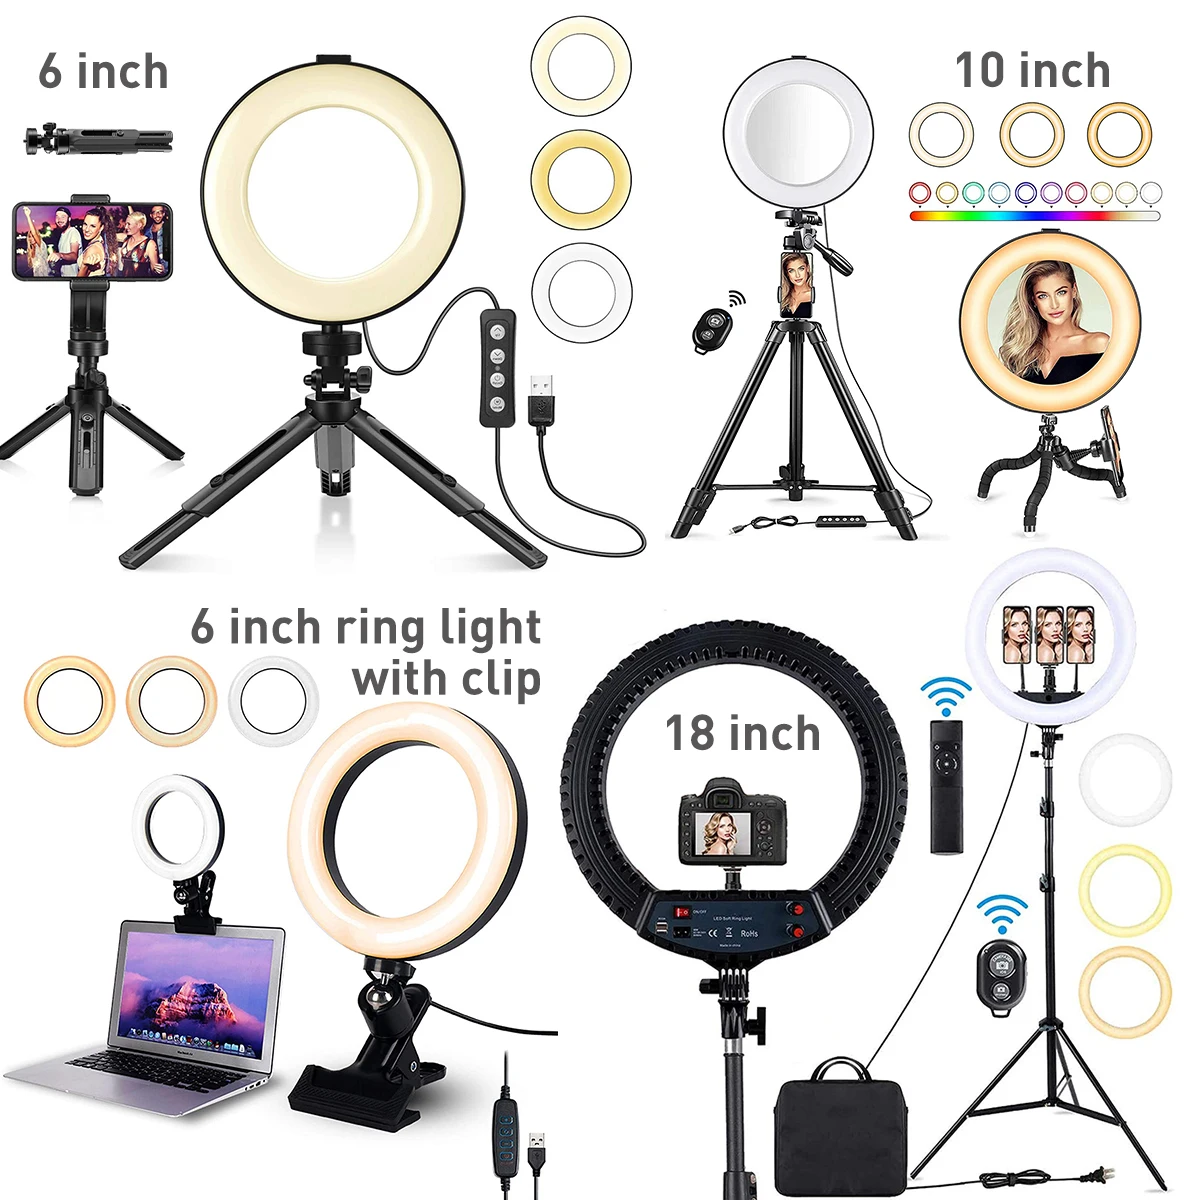 

10 inch 26 cm Beauty Selfie Photography Photo Ringlight LED Lamp Fill Light Video Camera Makeup Ring Light with Tripod Stand